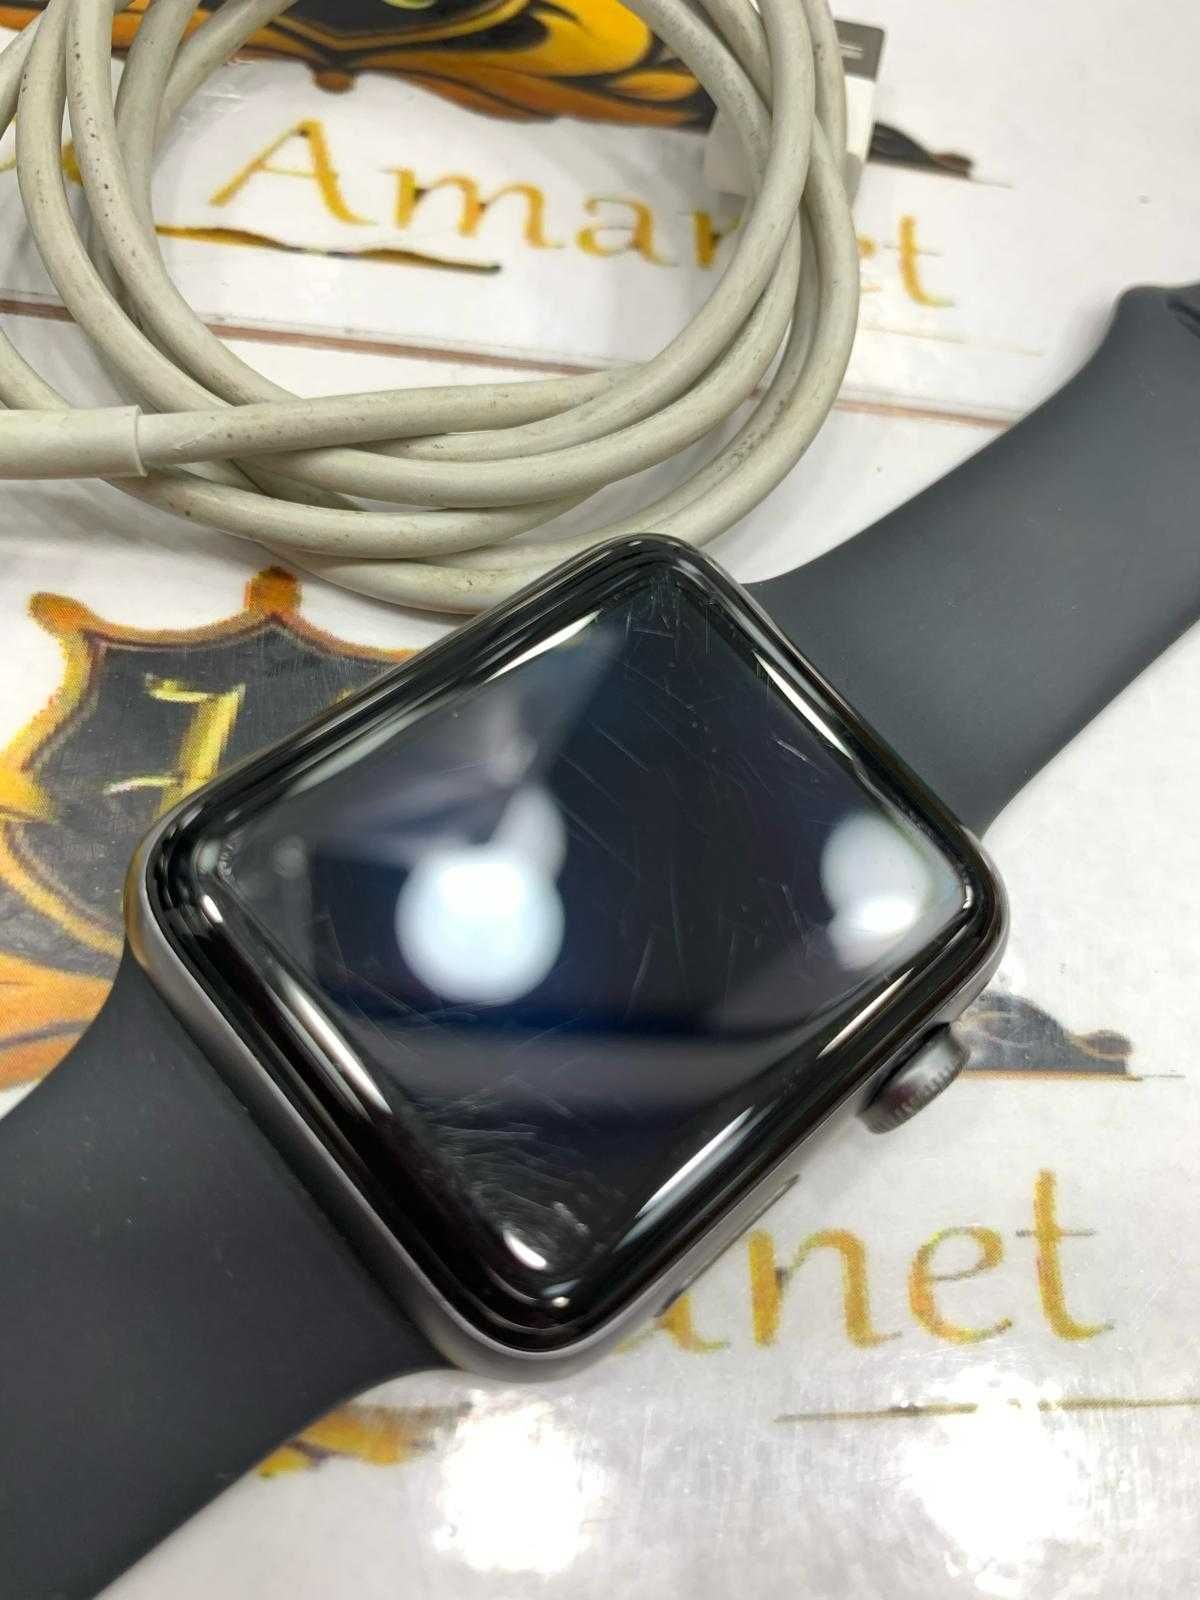 Hope Amanet P12 - Apple Watch Seria 3 / 42mm / Space Gray